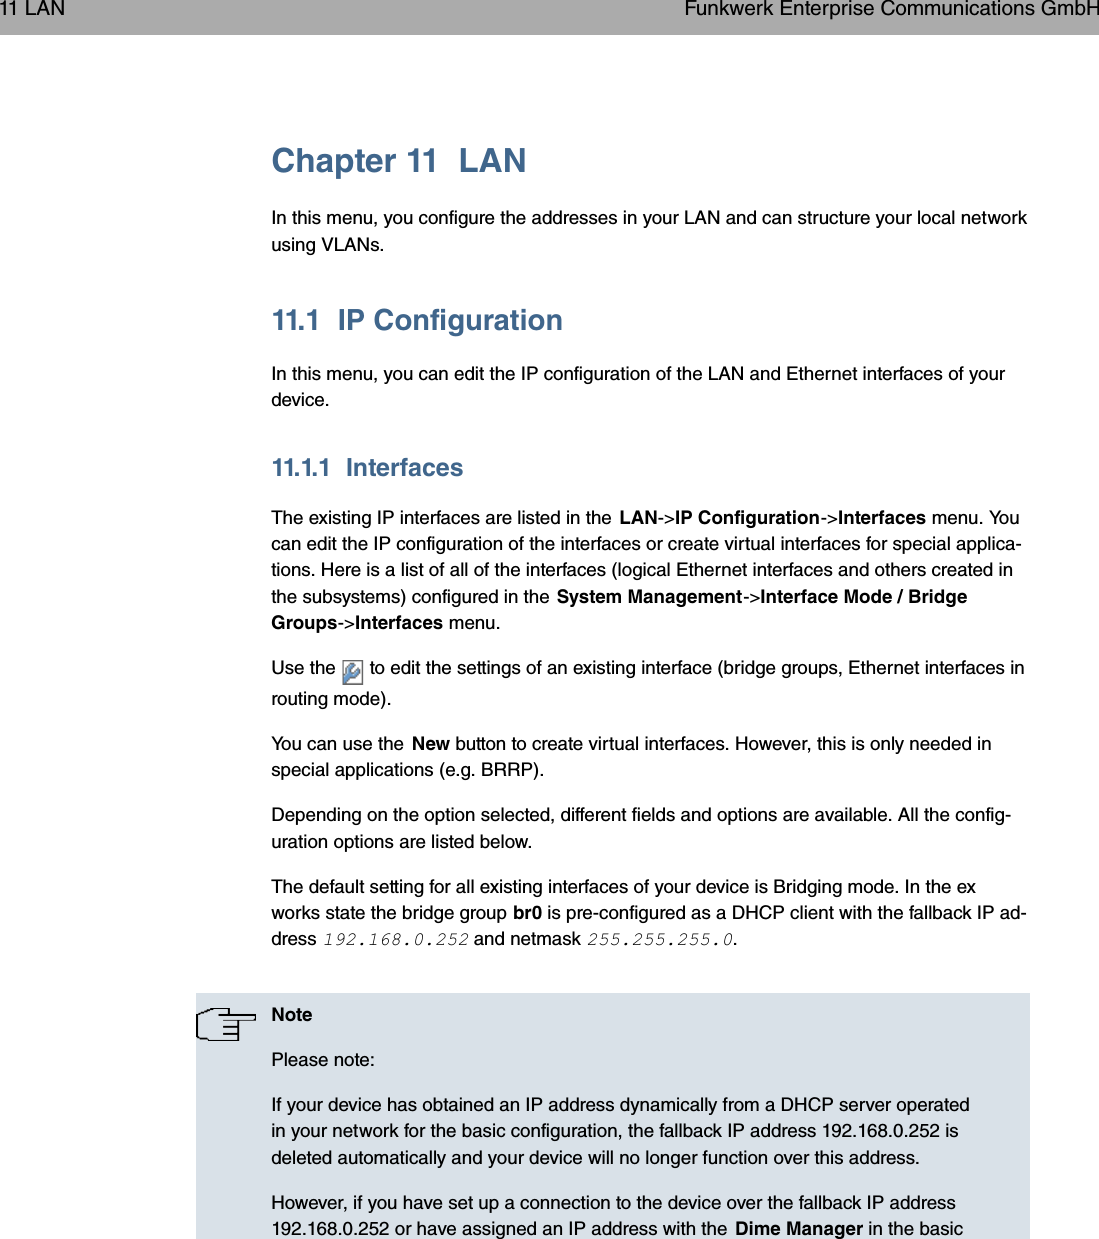 Chapter 11 LANIn this menu, you configure the addresses in your LAN and can structure your local networkusing VLANs.11.1 IP ConfigurationIn this menu, you can edit the IP configuration of the LAN and Ethernet interfaces of yourdevice.11.1.1 InterfacesThe existing IP interfaces are listed in the LAN-&gt;IP Configuration-&gt;Interfaces menu. Youcan edit the IP configuration of the interfaces or create virtual interfaces for special applica-tions. Here is a list of all of the interfaces (logical Ethernet interfaces and others created inthe subsystems) configured in the System Management-&gt;Interface Mode / BridgeGroups-&gt;Interfaces menu.Use the to edit the settings of an existing interface (bridge groups, Ethernet interfaces inrouting mode).You can use the New button to create virtual interfaces. However, this is only needed inspecial applications (e.g. BRRP).Depending on the option selected, different fields and options are available. All the config-uration options are listed below.The default setting for all existing interfaces of your device is Bridging mode. In the exworks state the bridge group br0 is pre-configured as a DHCP client with the fallback IP ad-dress  and netmask .NotePlease note:If your device has obtained an IP address dynamically from a DHCP server operatedin your network for the basic configuration, the fallback IP address 192.168.0.252 isdeleted automatically and your device will no longer function over this address.However, if you have set up a connection to the device over the fallback IP address192.168.0.252 or have assigned an IP address with the Dime Manager in the basic11 LAN Funkwerk Enterprise Communications GmbH108 bintec WLAN and Industrial WLAN